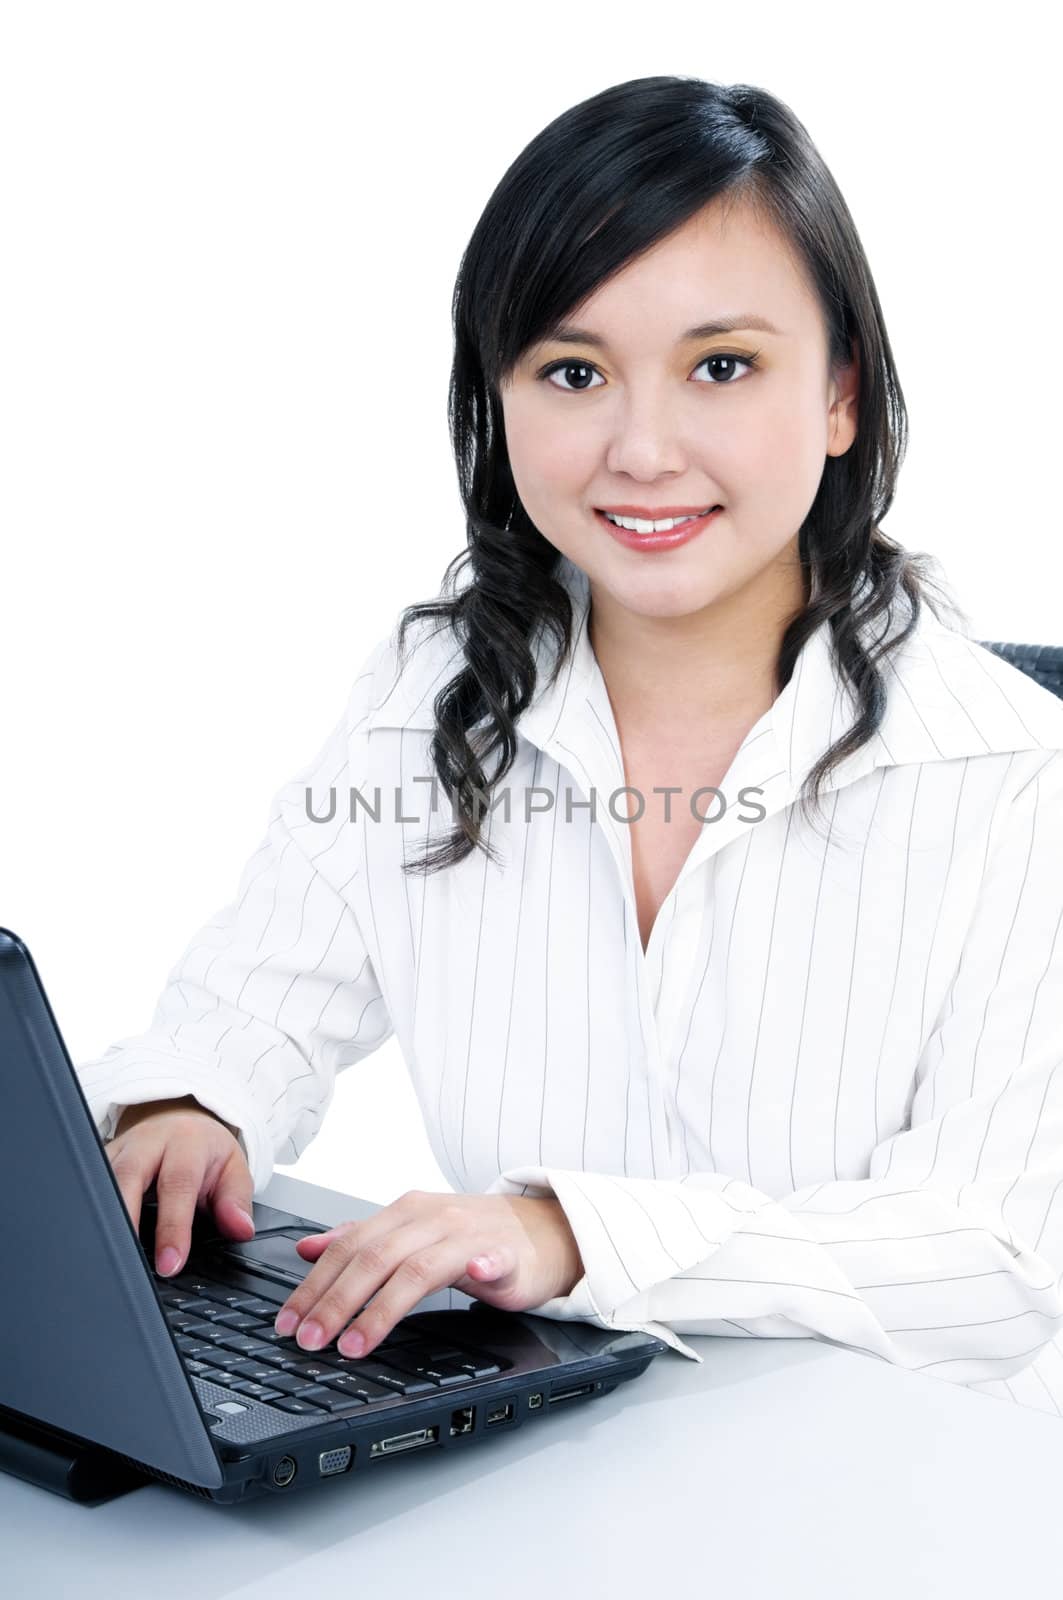 Portrait of a young businesswoman using laptop, over white background.